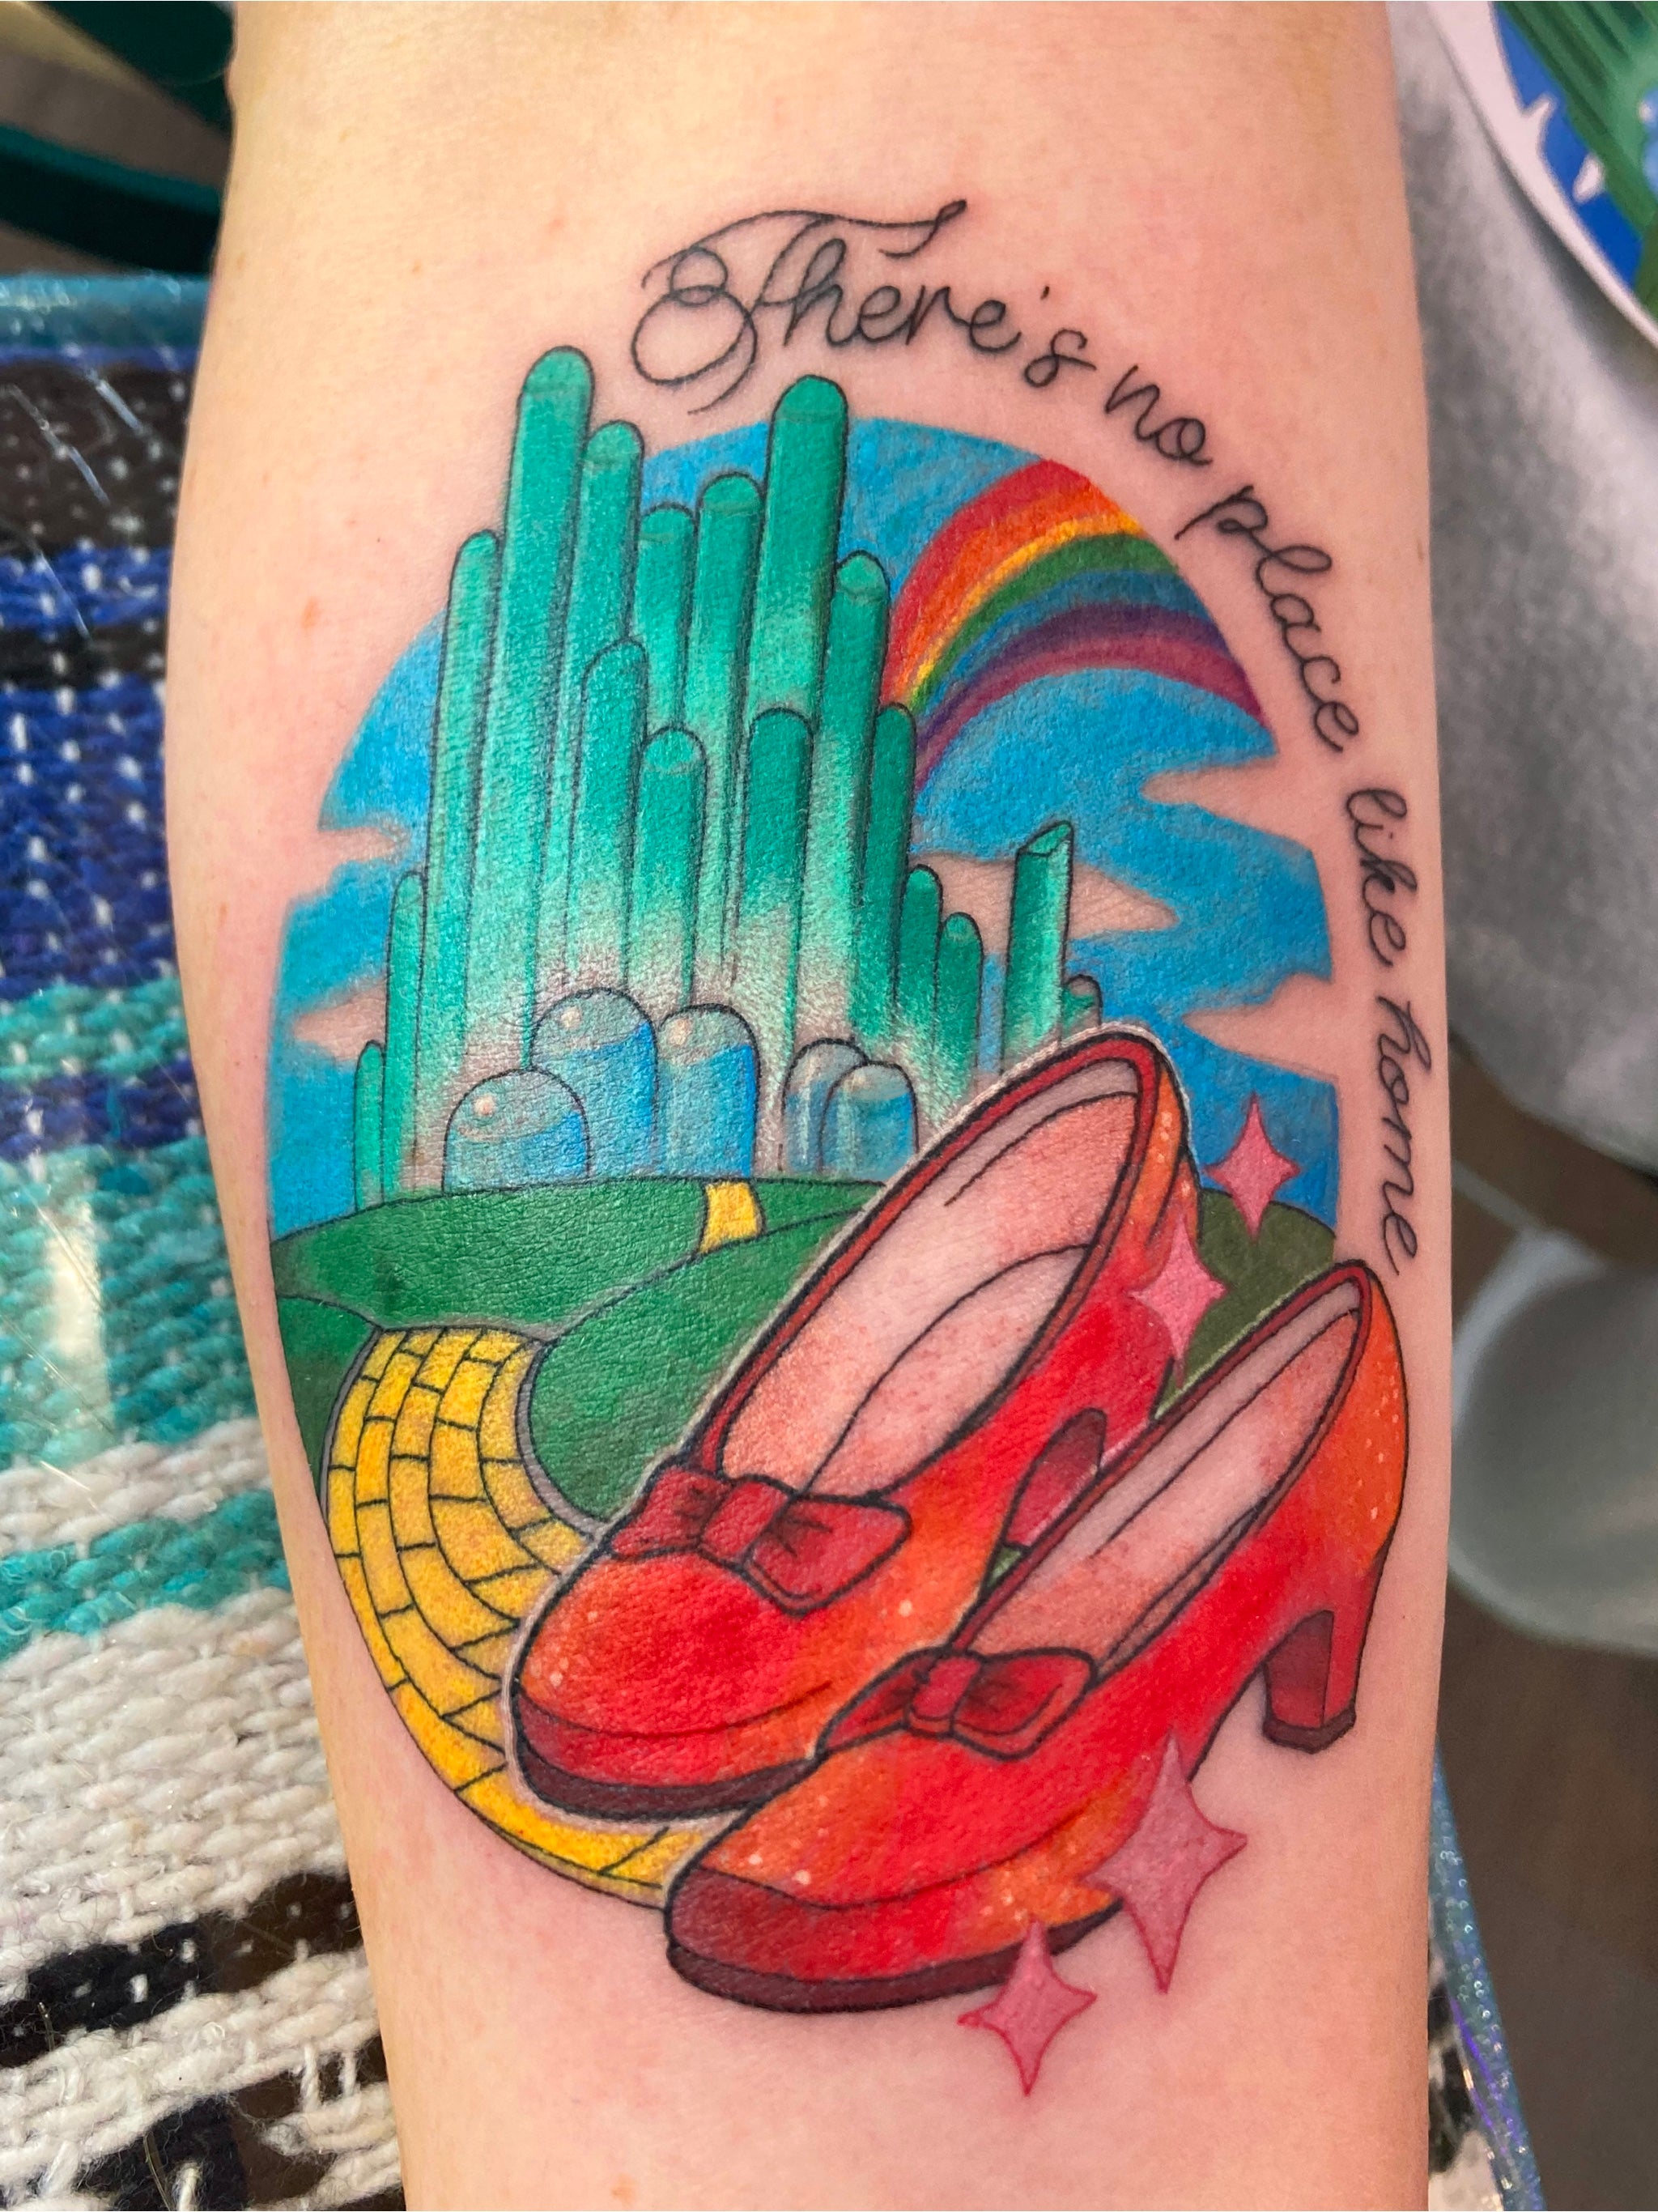 0340  My OZ tattoo and ruby slippers  The Improper Philadelphian  Flickr